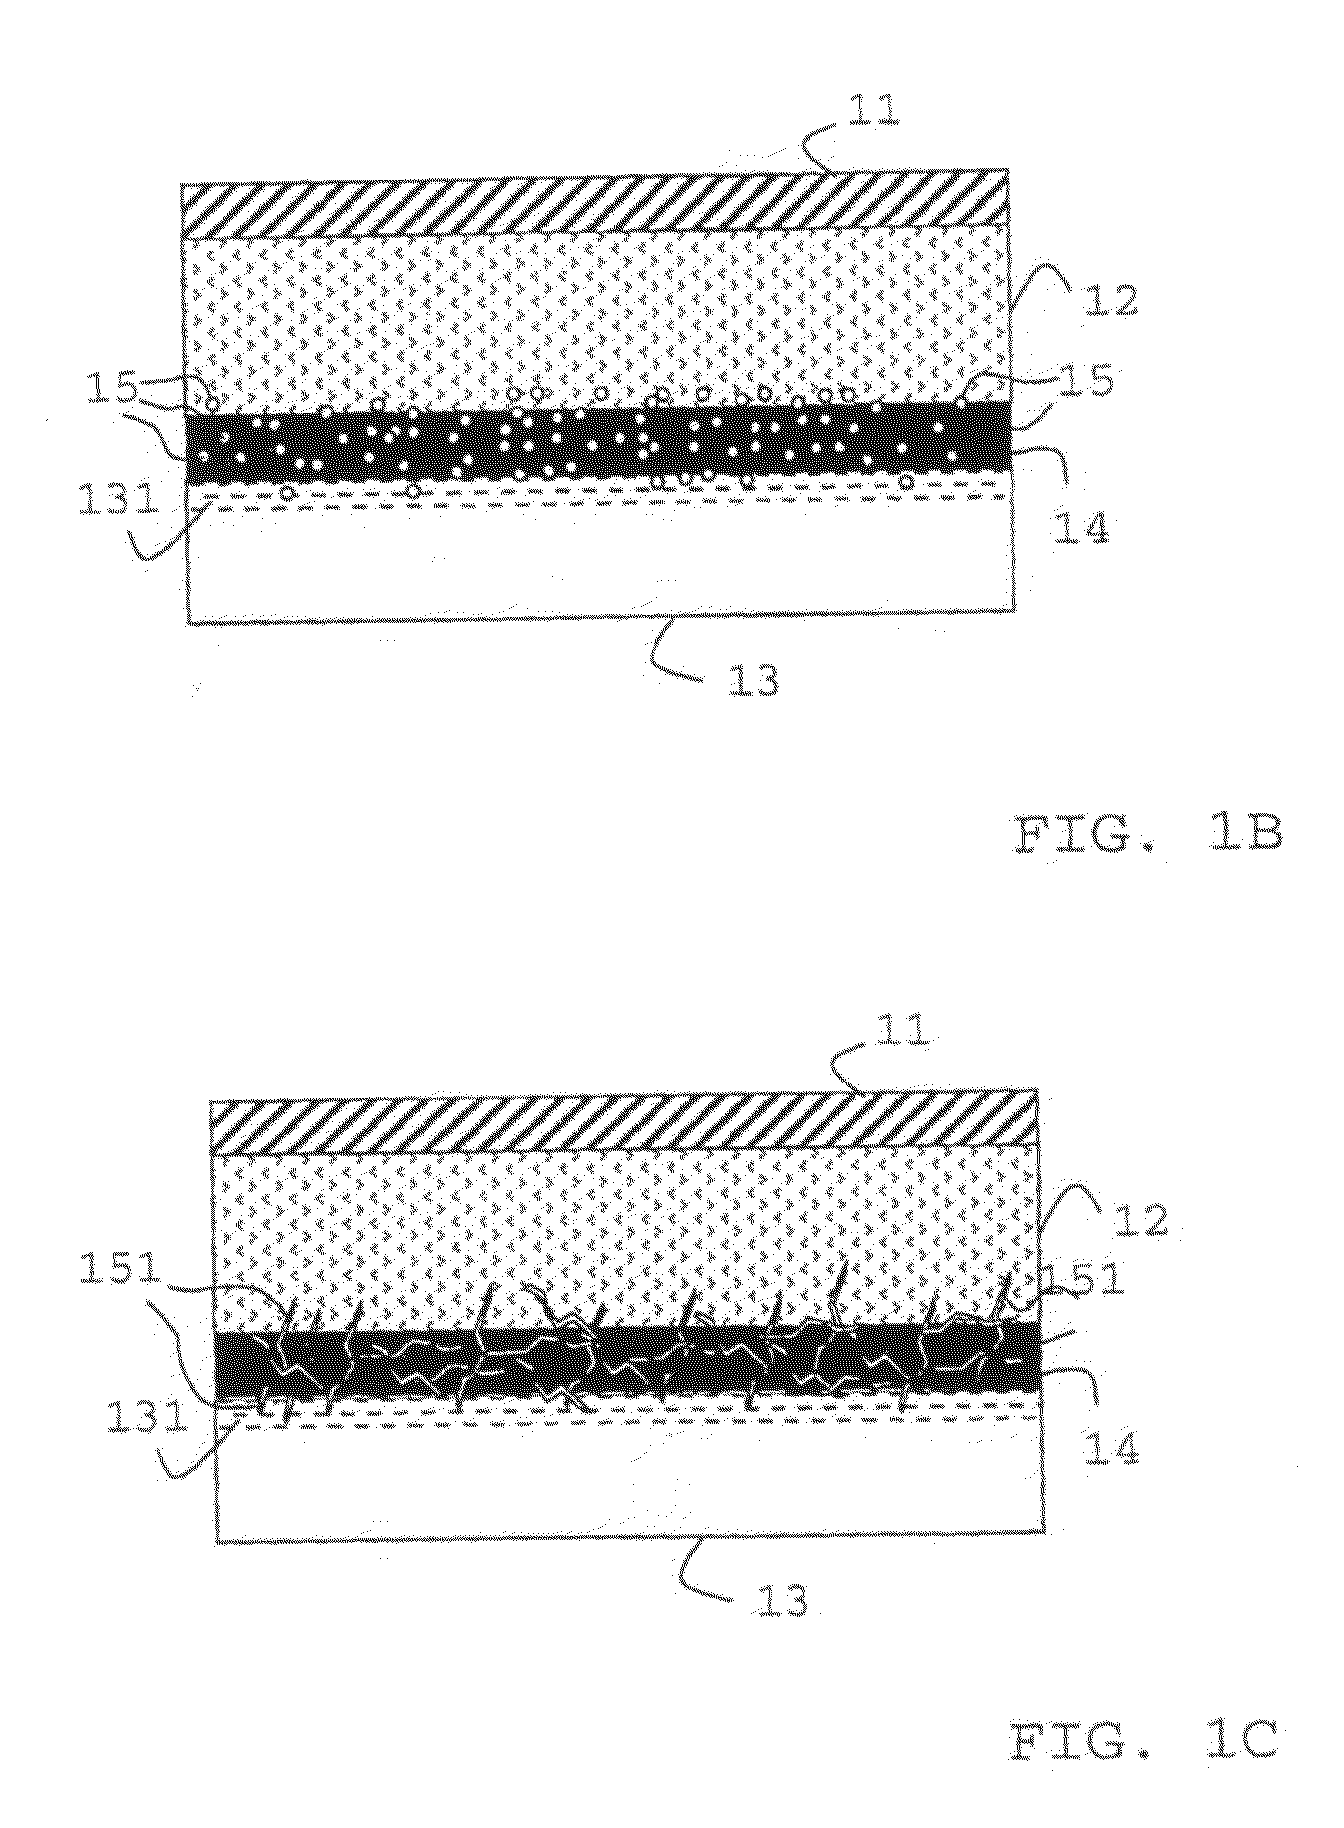 Methods and materials for zonal isolation